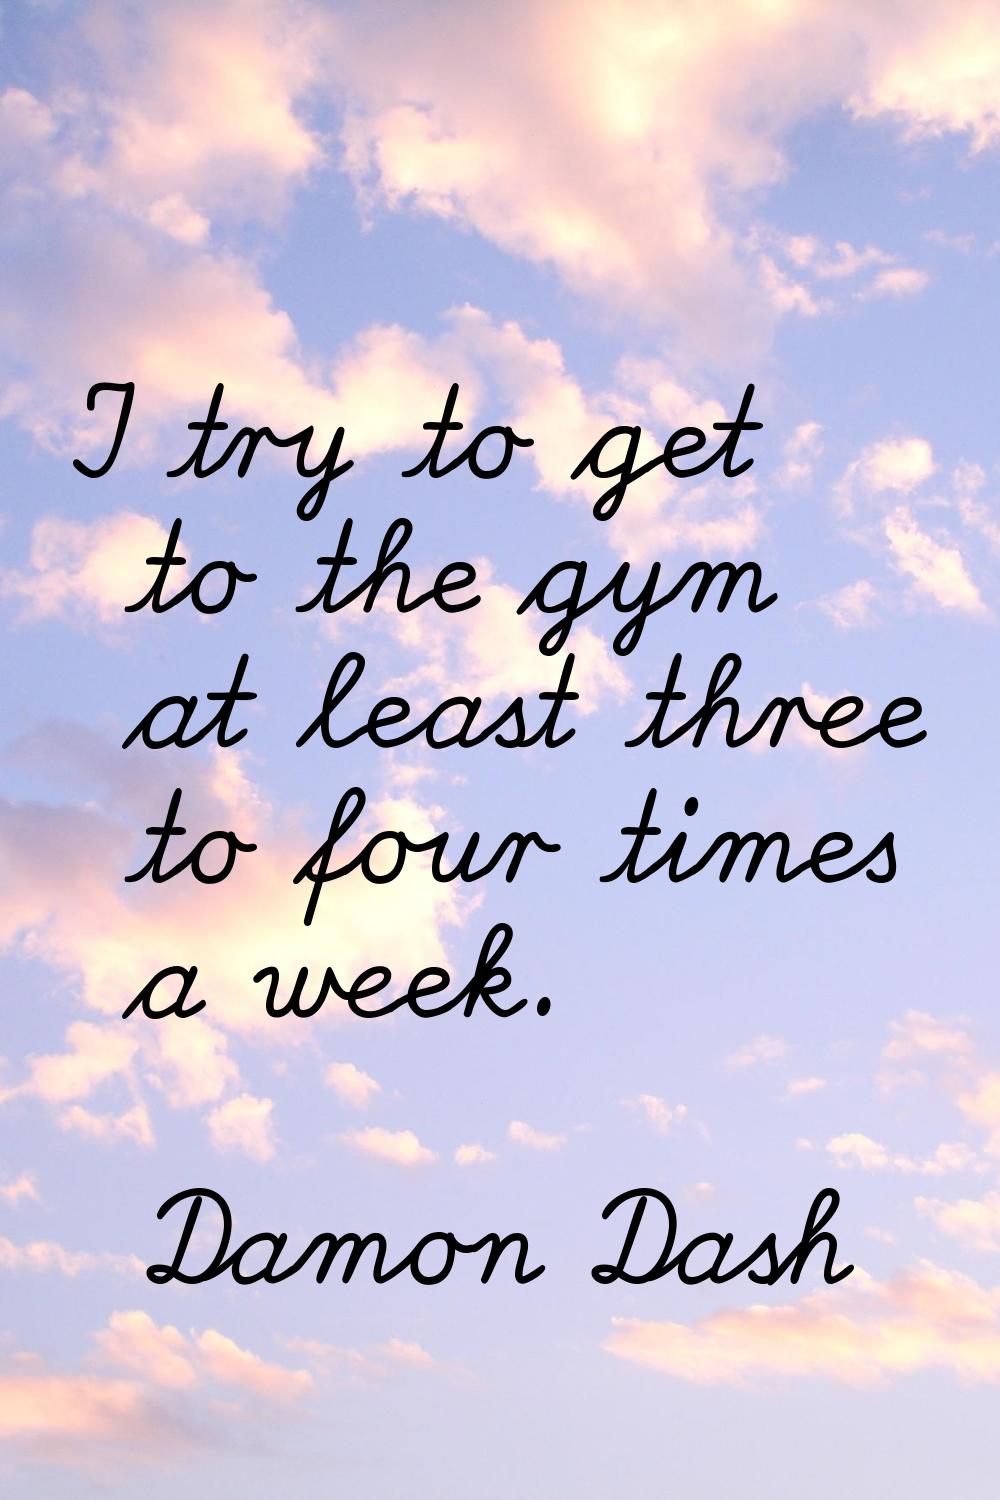 I try to get to the gym at least three to four times a week.